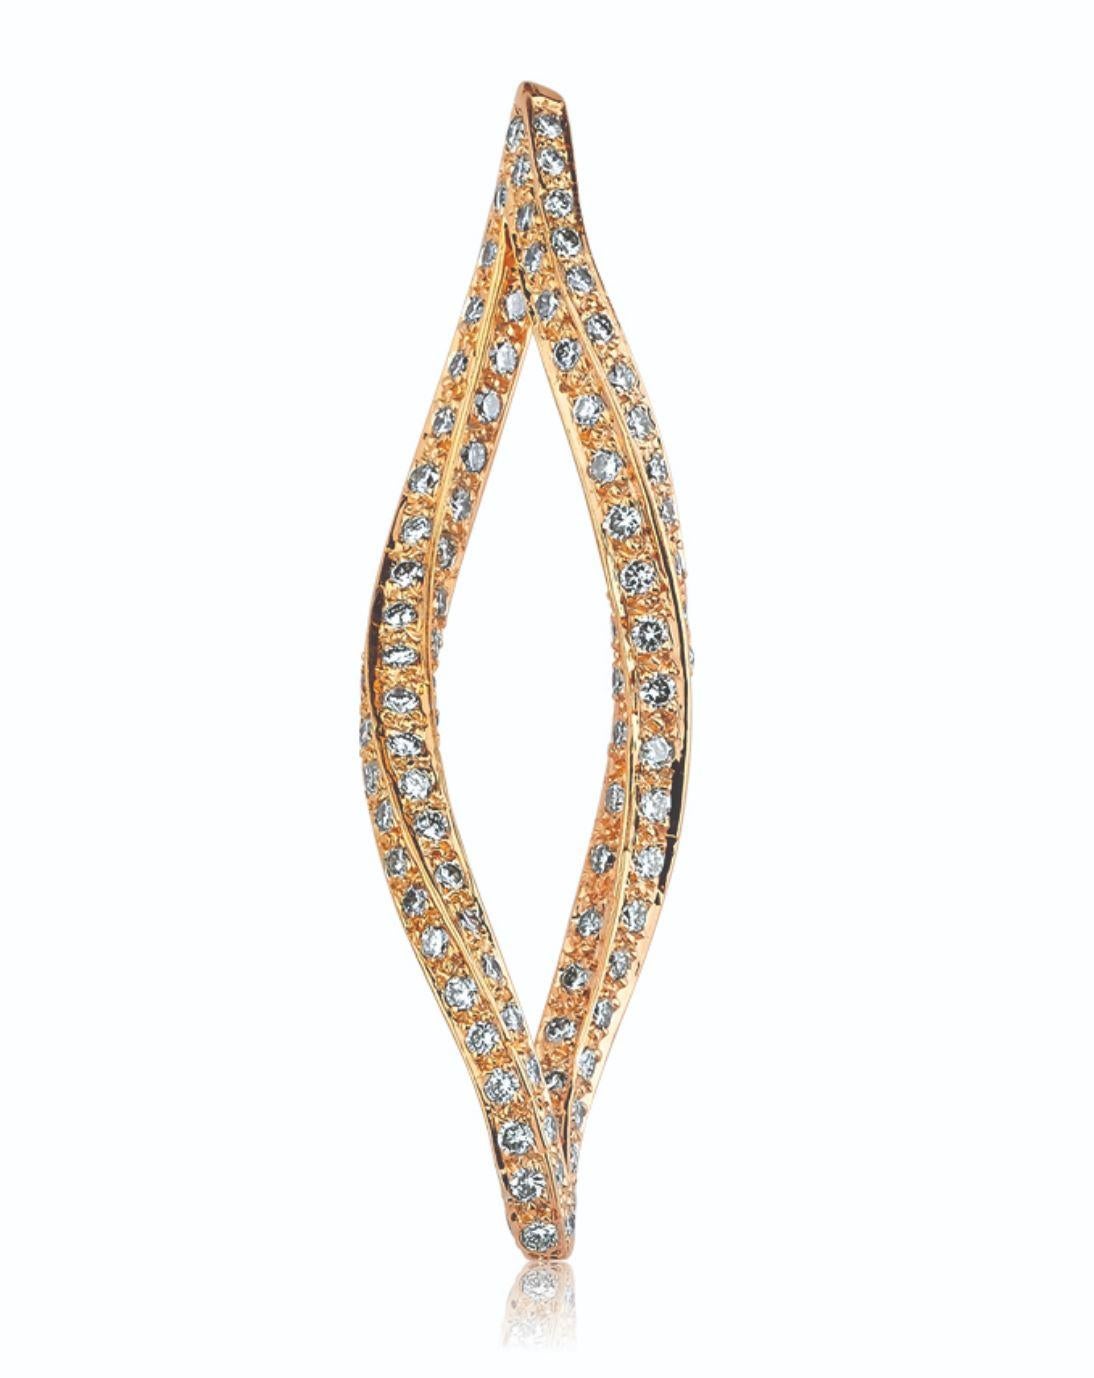 1.90 ct Brilliant Cut Diamonds are set in 4,70 g 18K Rose Gold Pendant with 14K Rose Gold Chain.